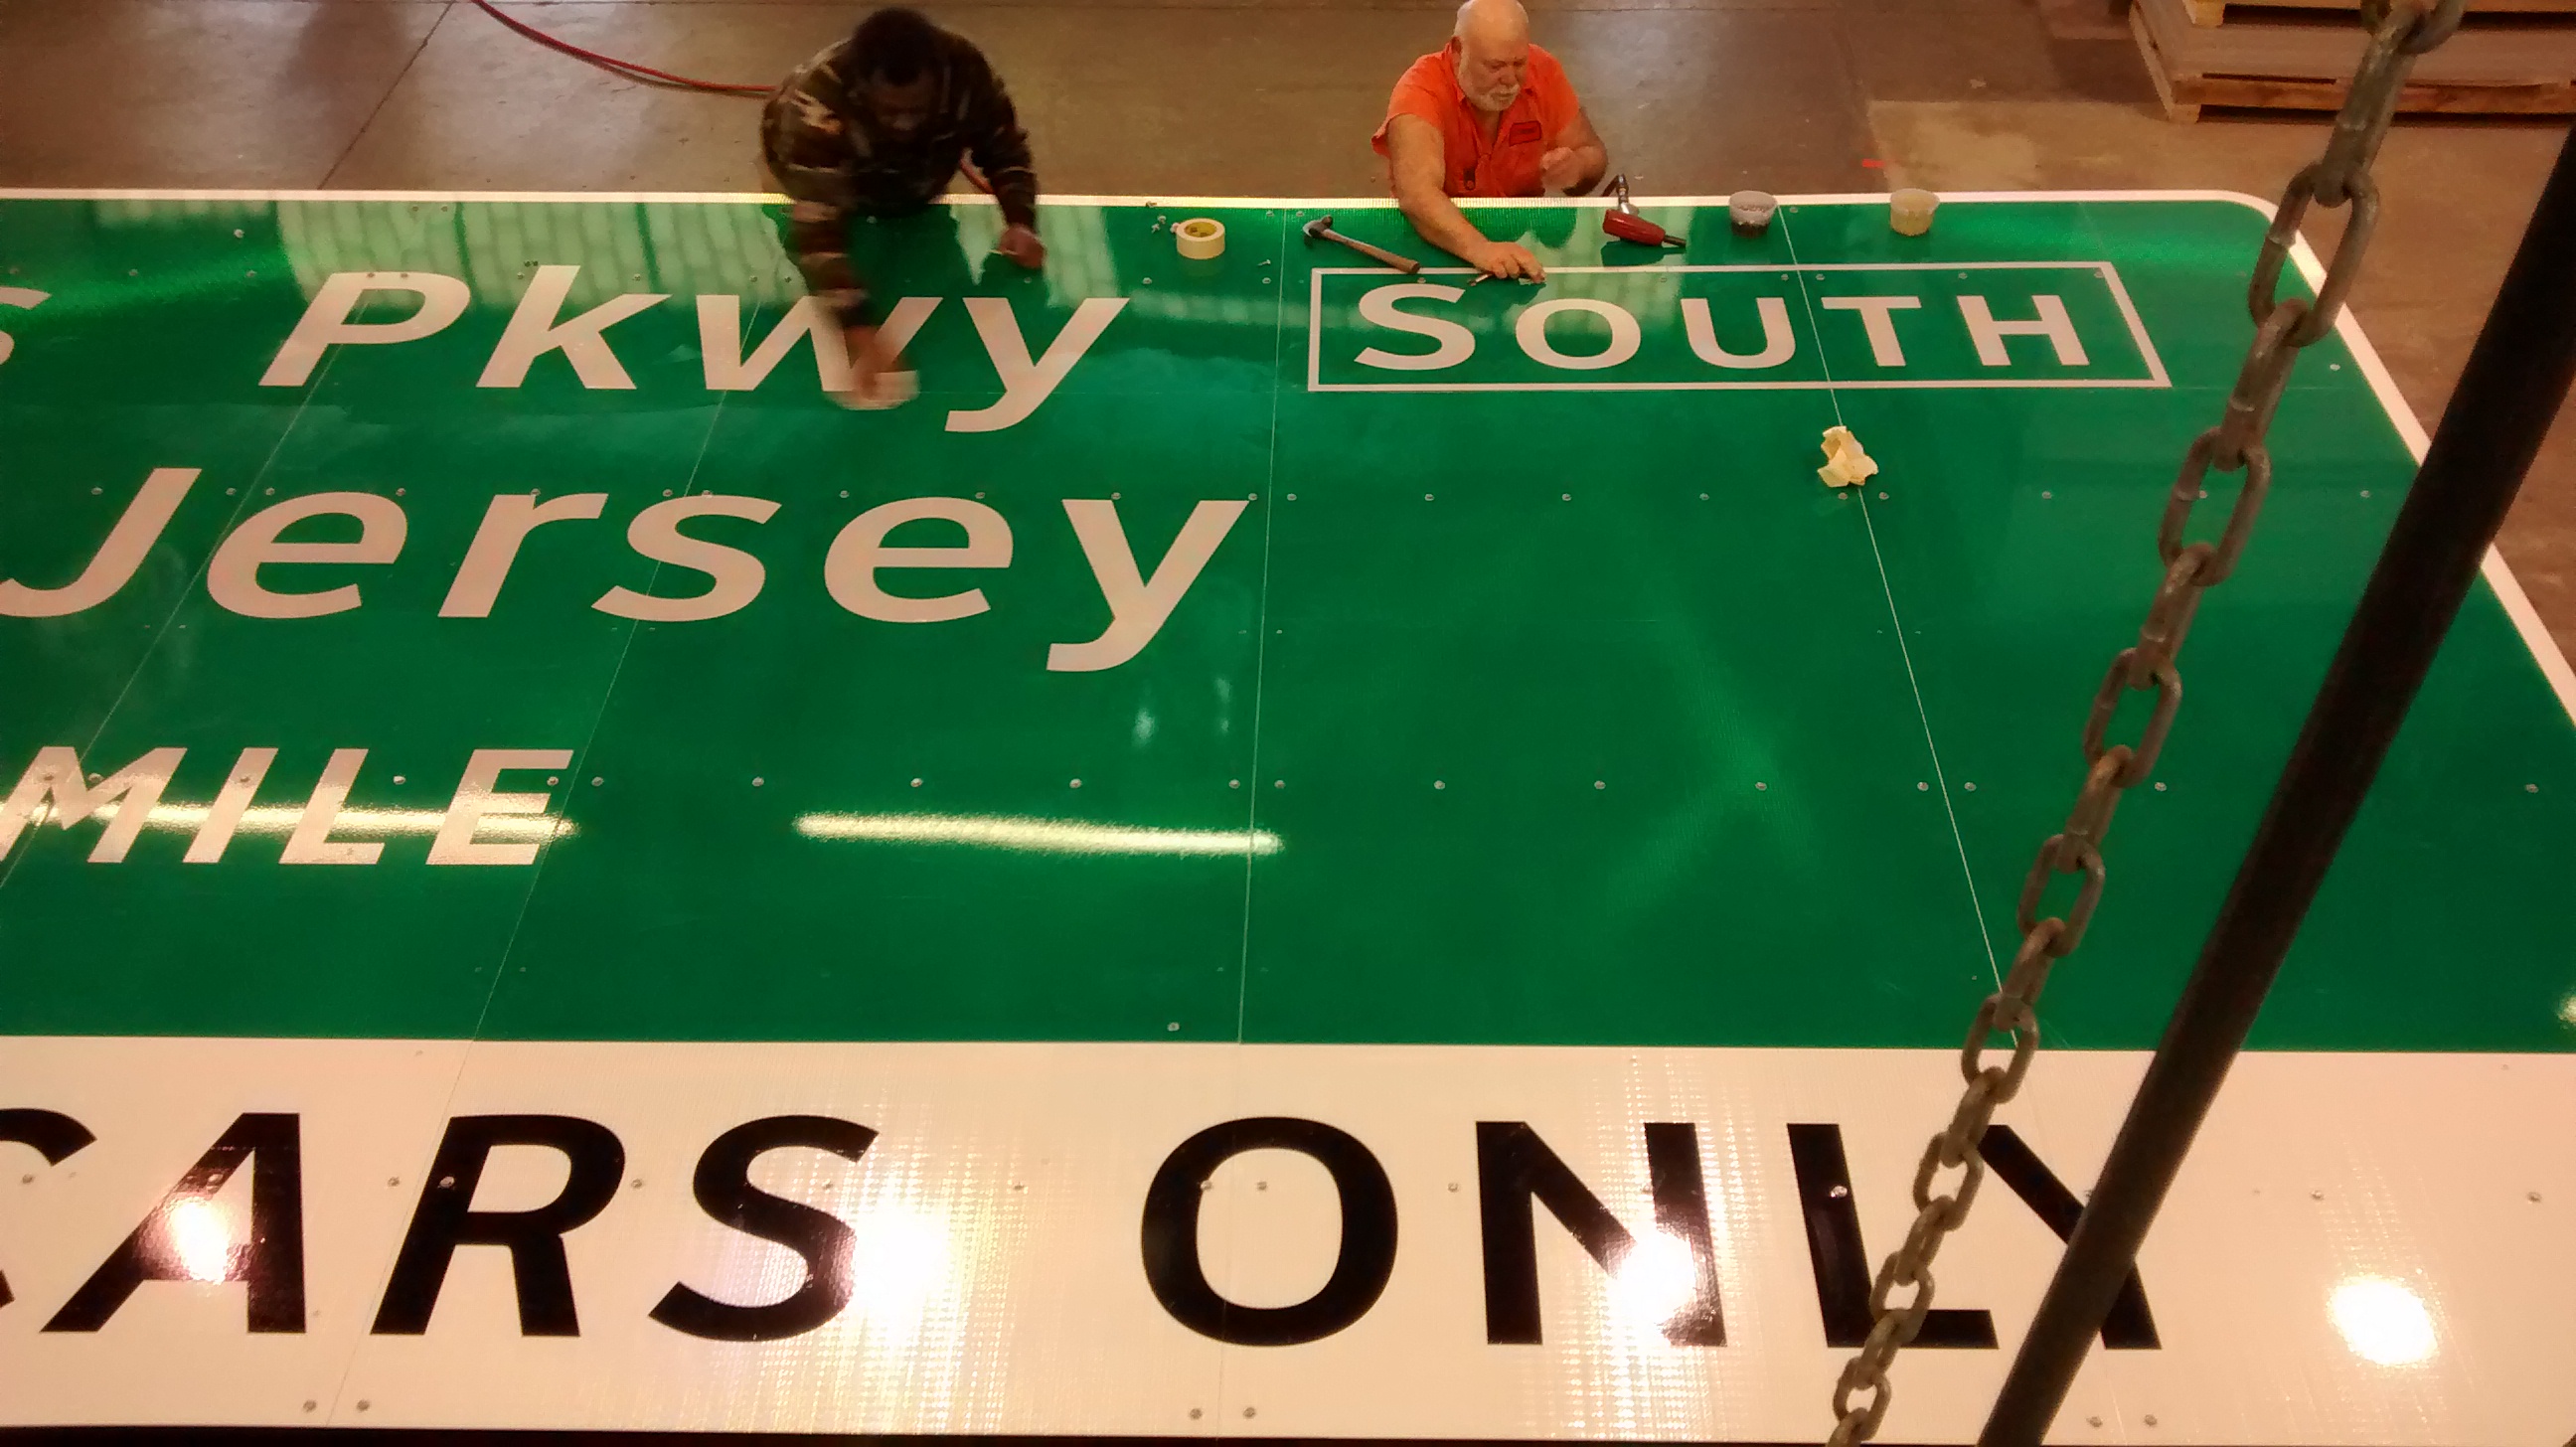 big are freeway signs - Outh Pkwy South Jersey 21RS Only